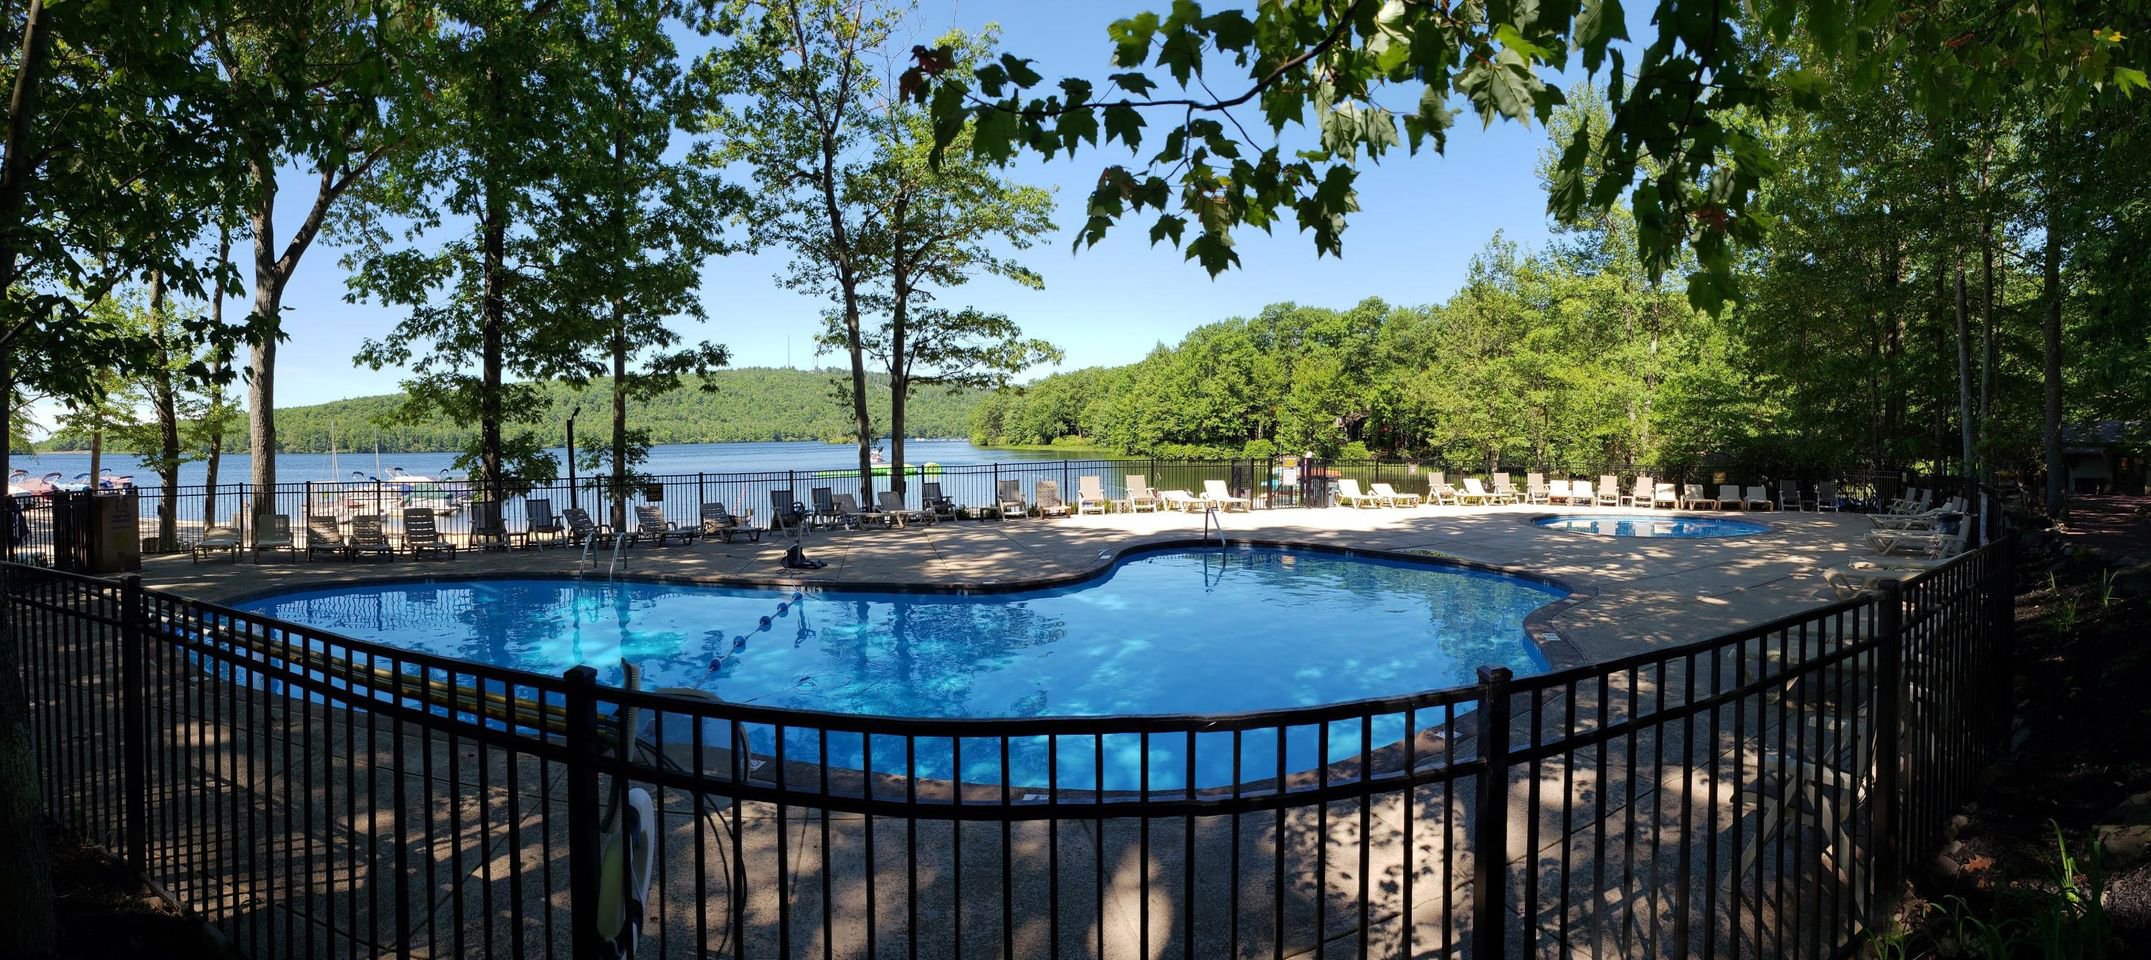 Pool access is included with guest passes